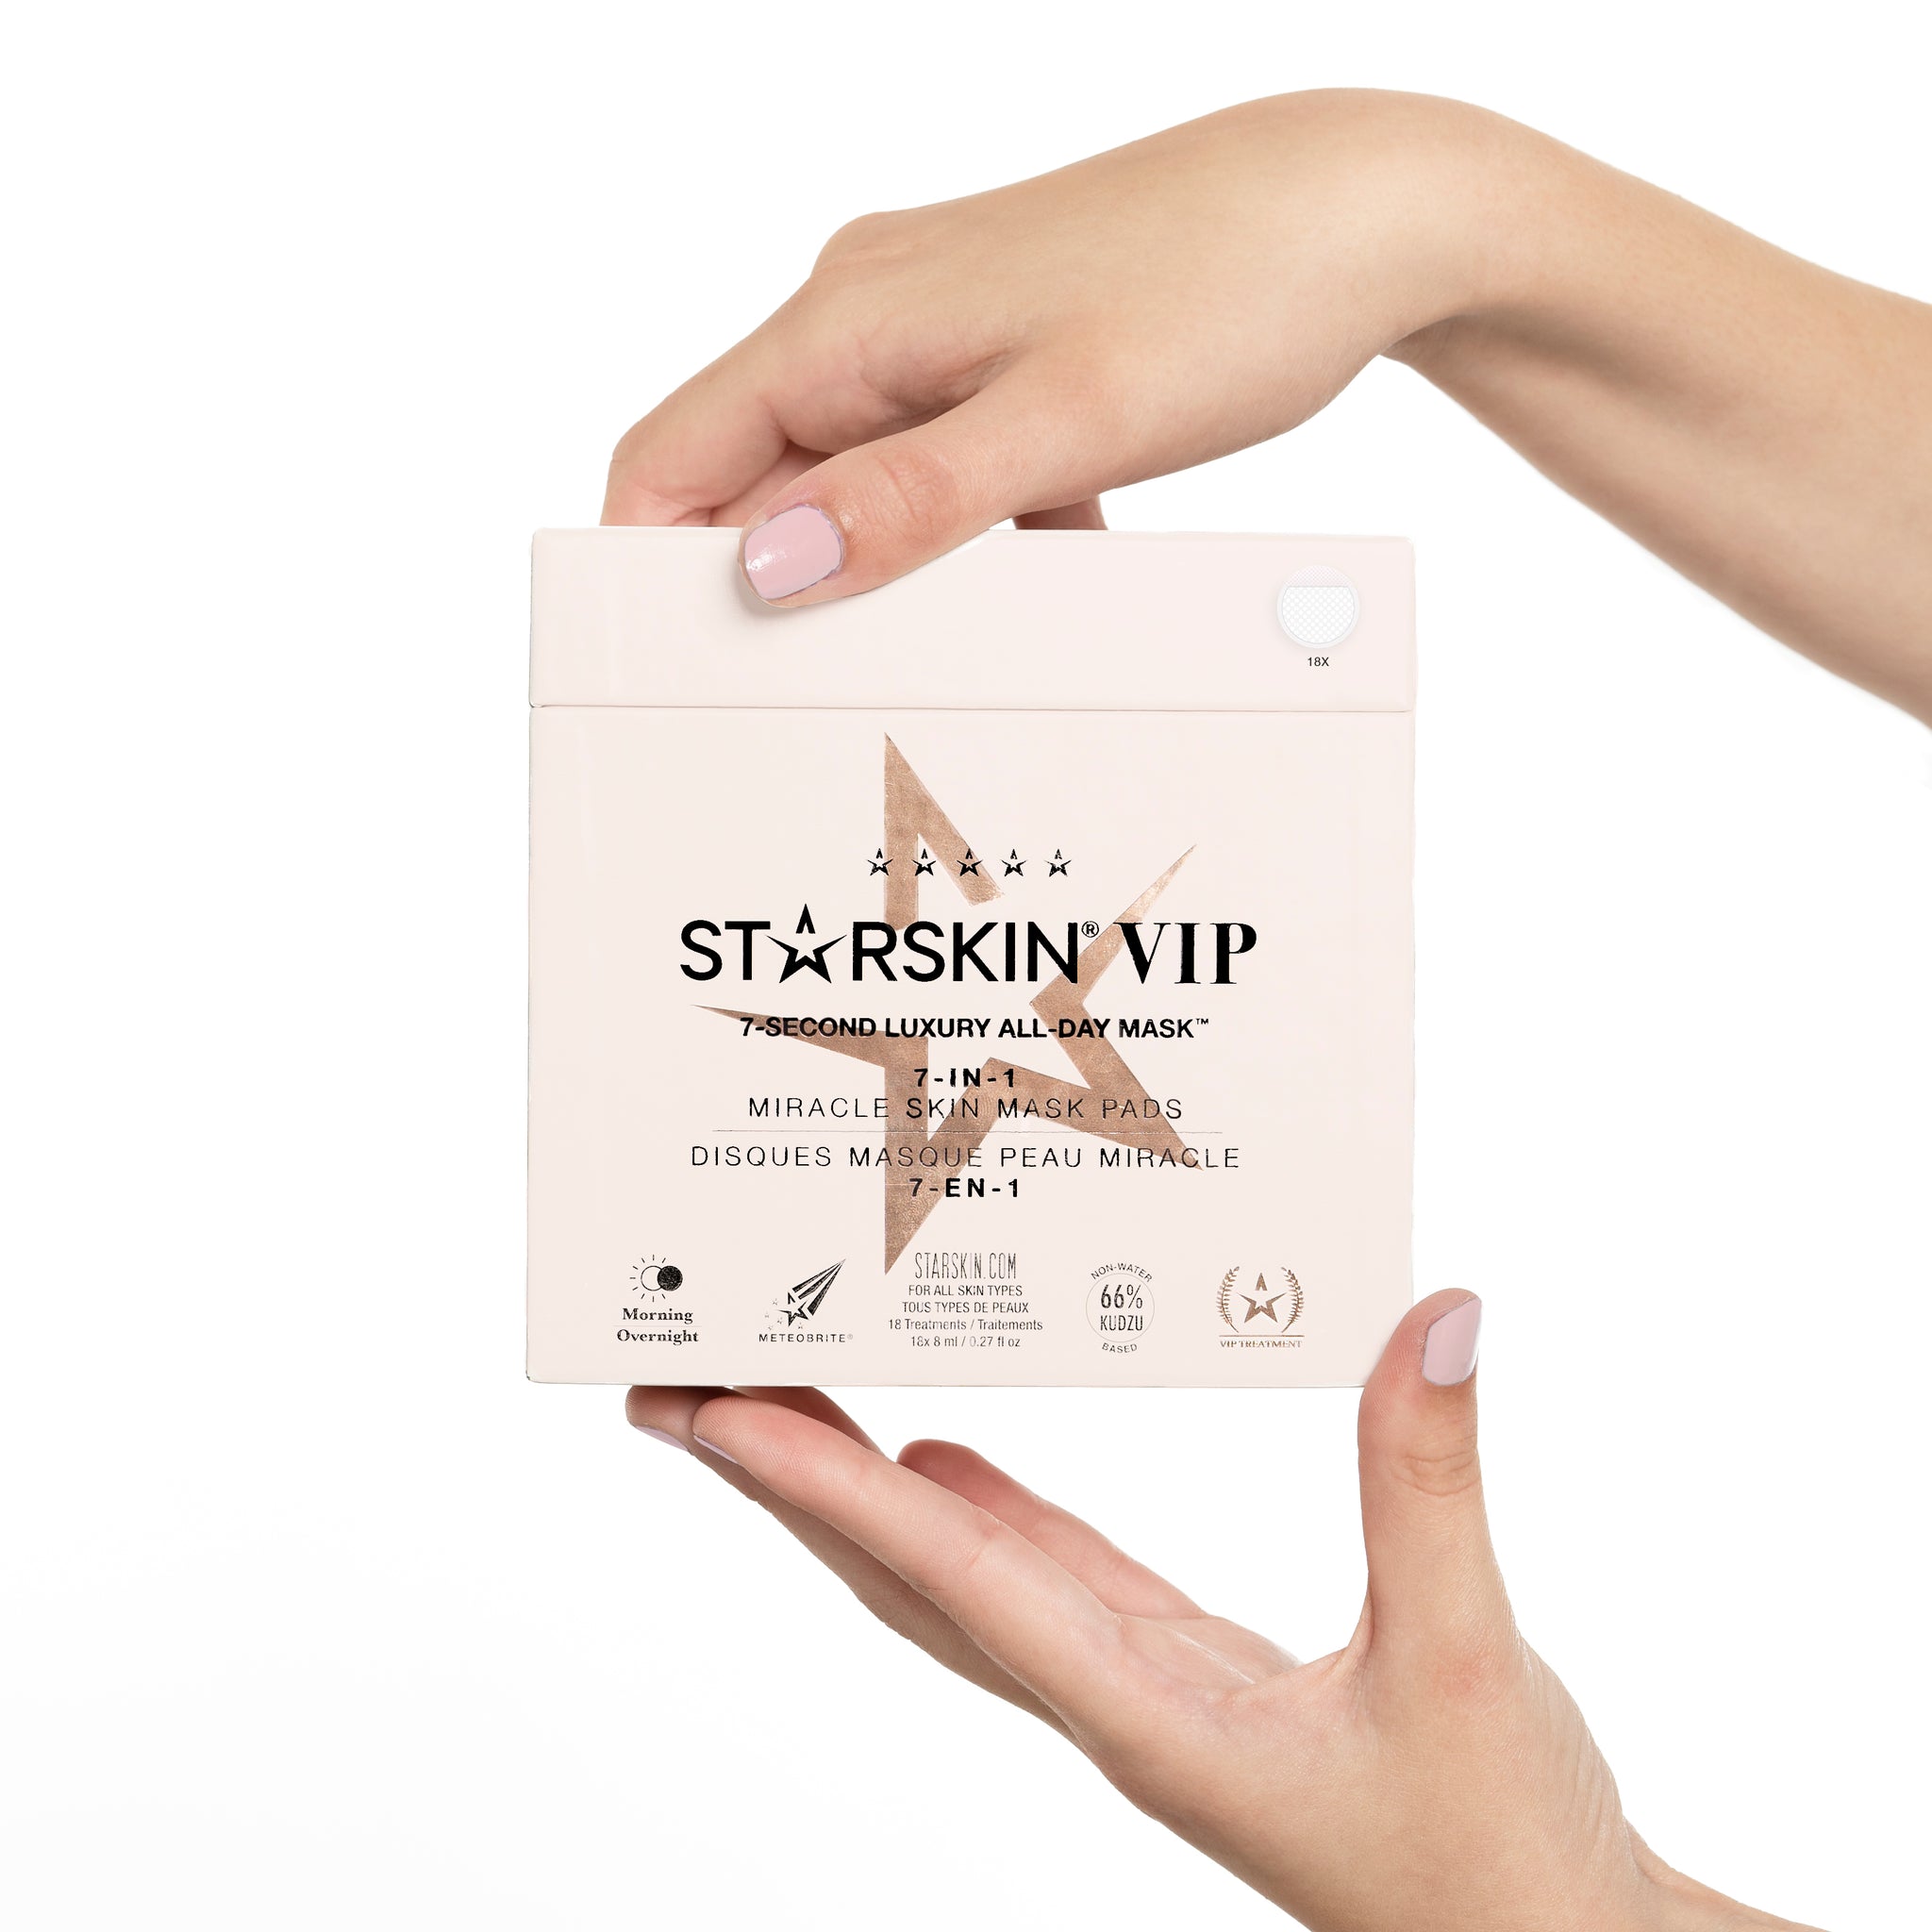 Starskin's 7 Seconds mask product box being held by someone in two hands. 